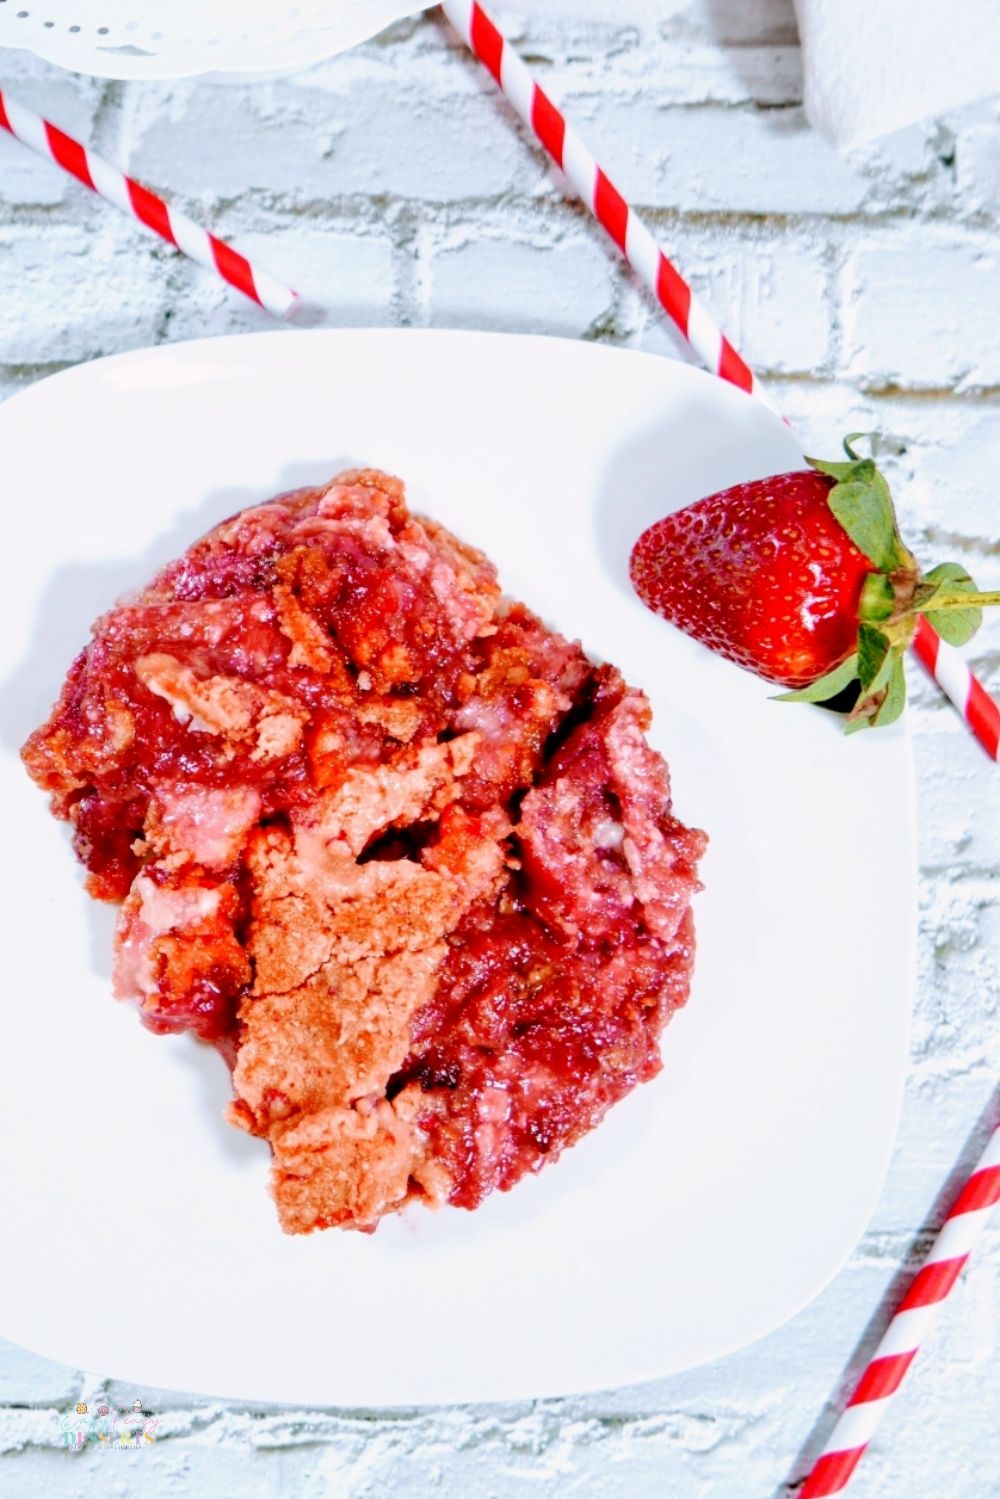 Image of strawberry crumble recipe in a white serving plate